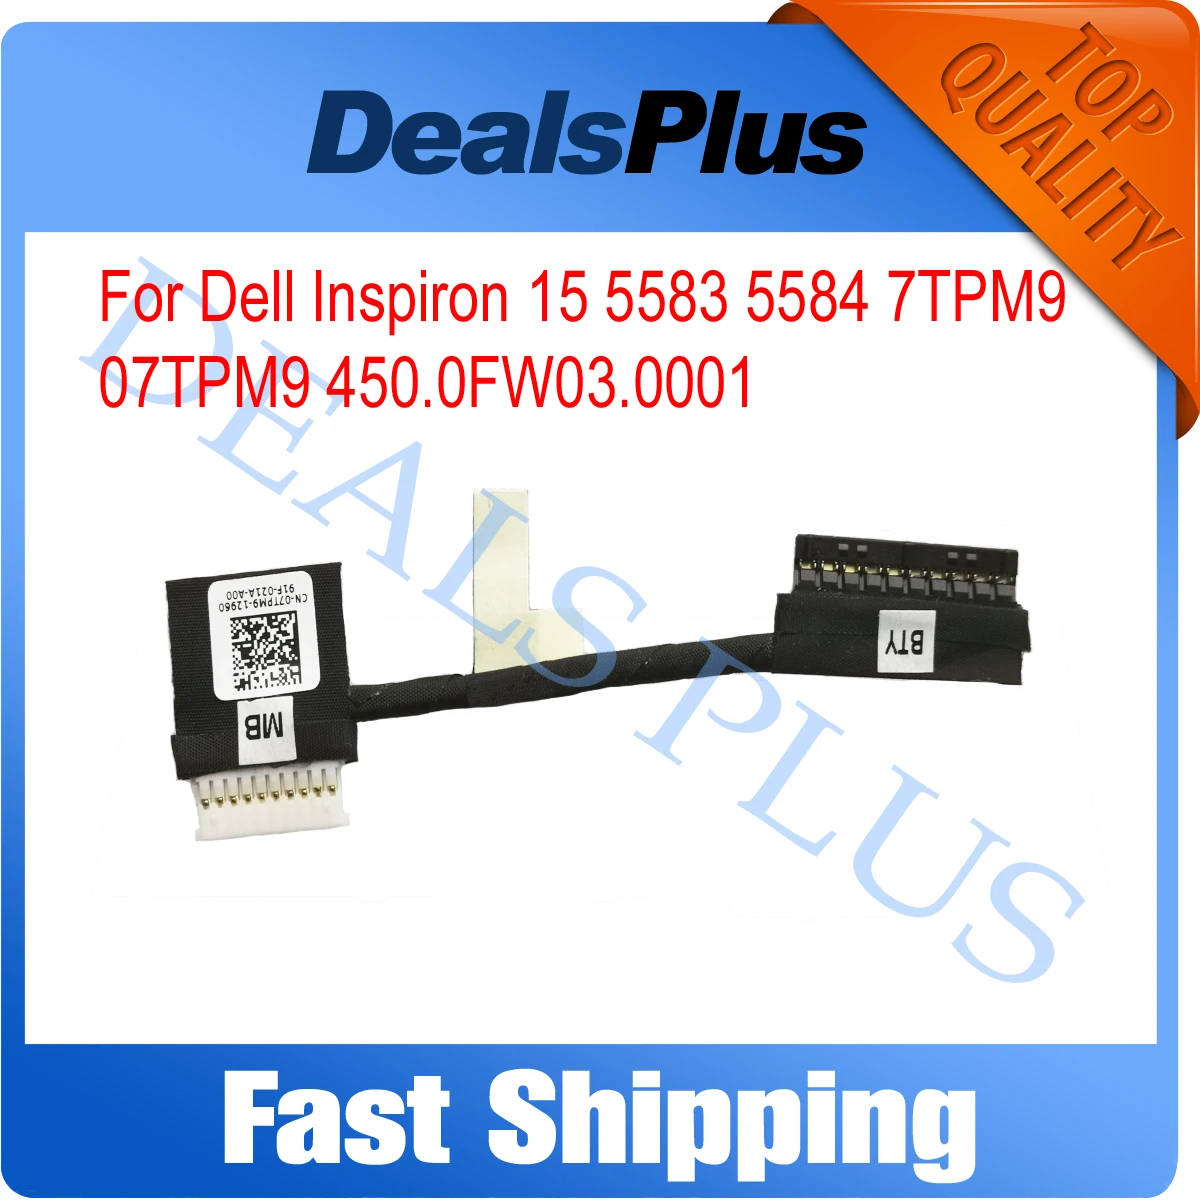 Replacement New Battery Cable For Dell Inspiron 15 5583 5584 7TPM9 07TPM9 450.0FW03.0001